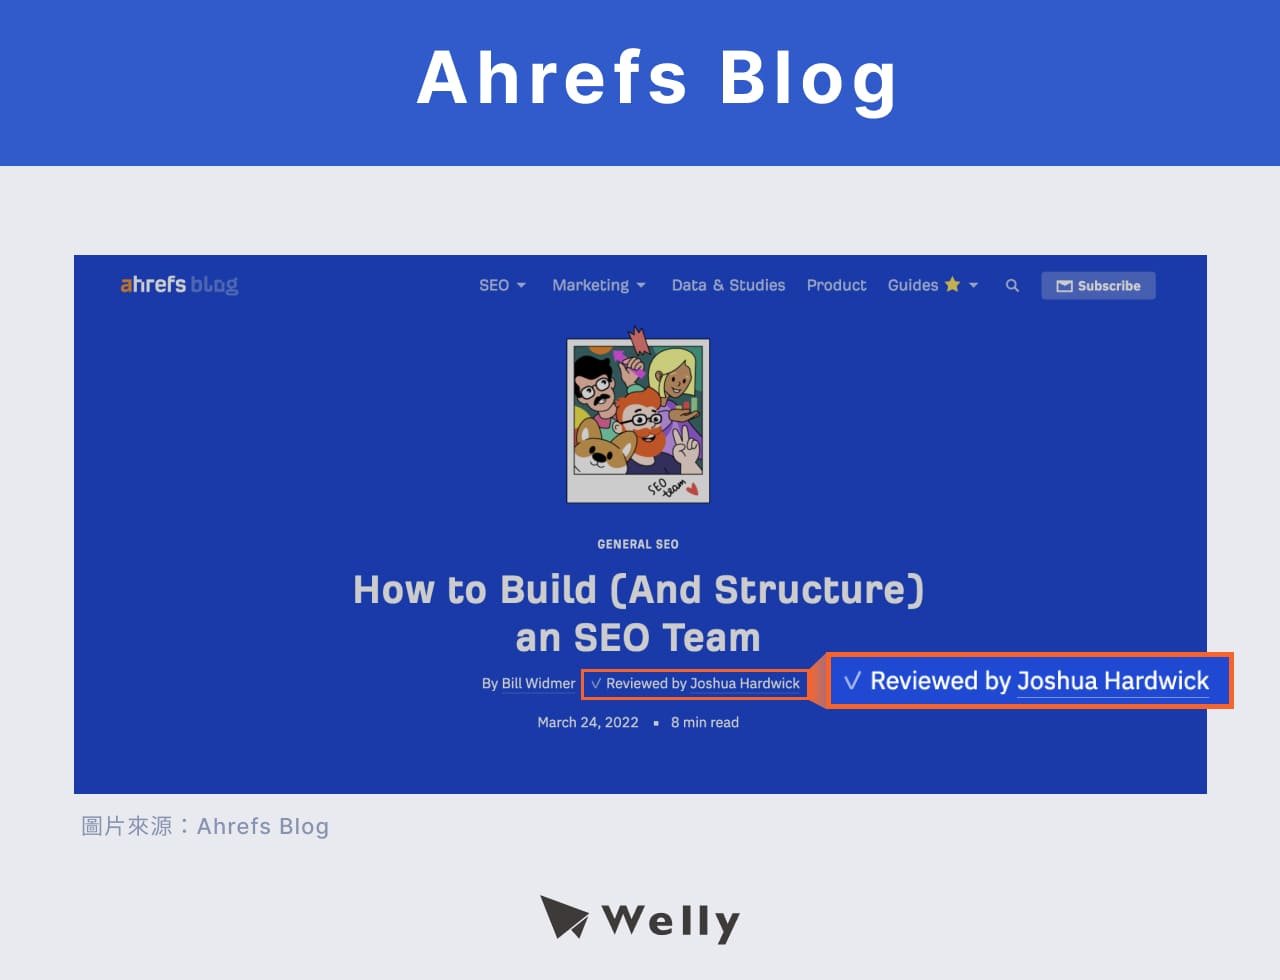 Ahrefs Blog - Reviewed by